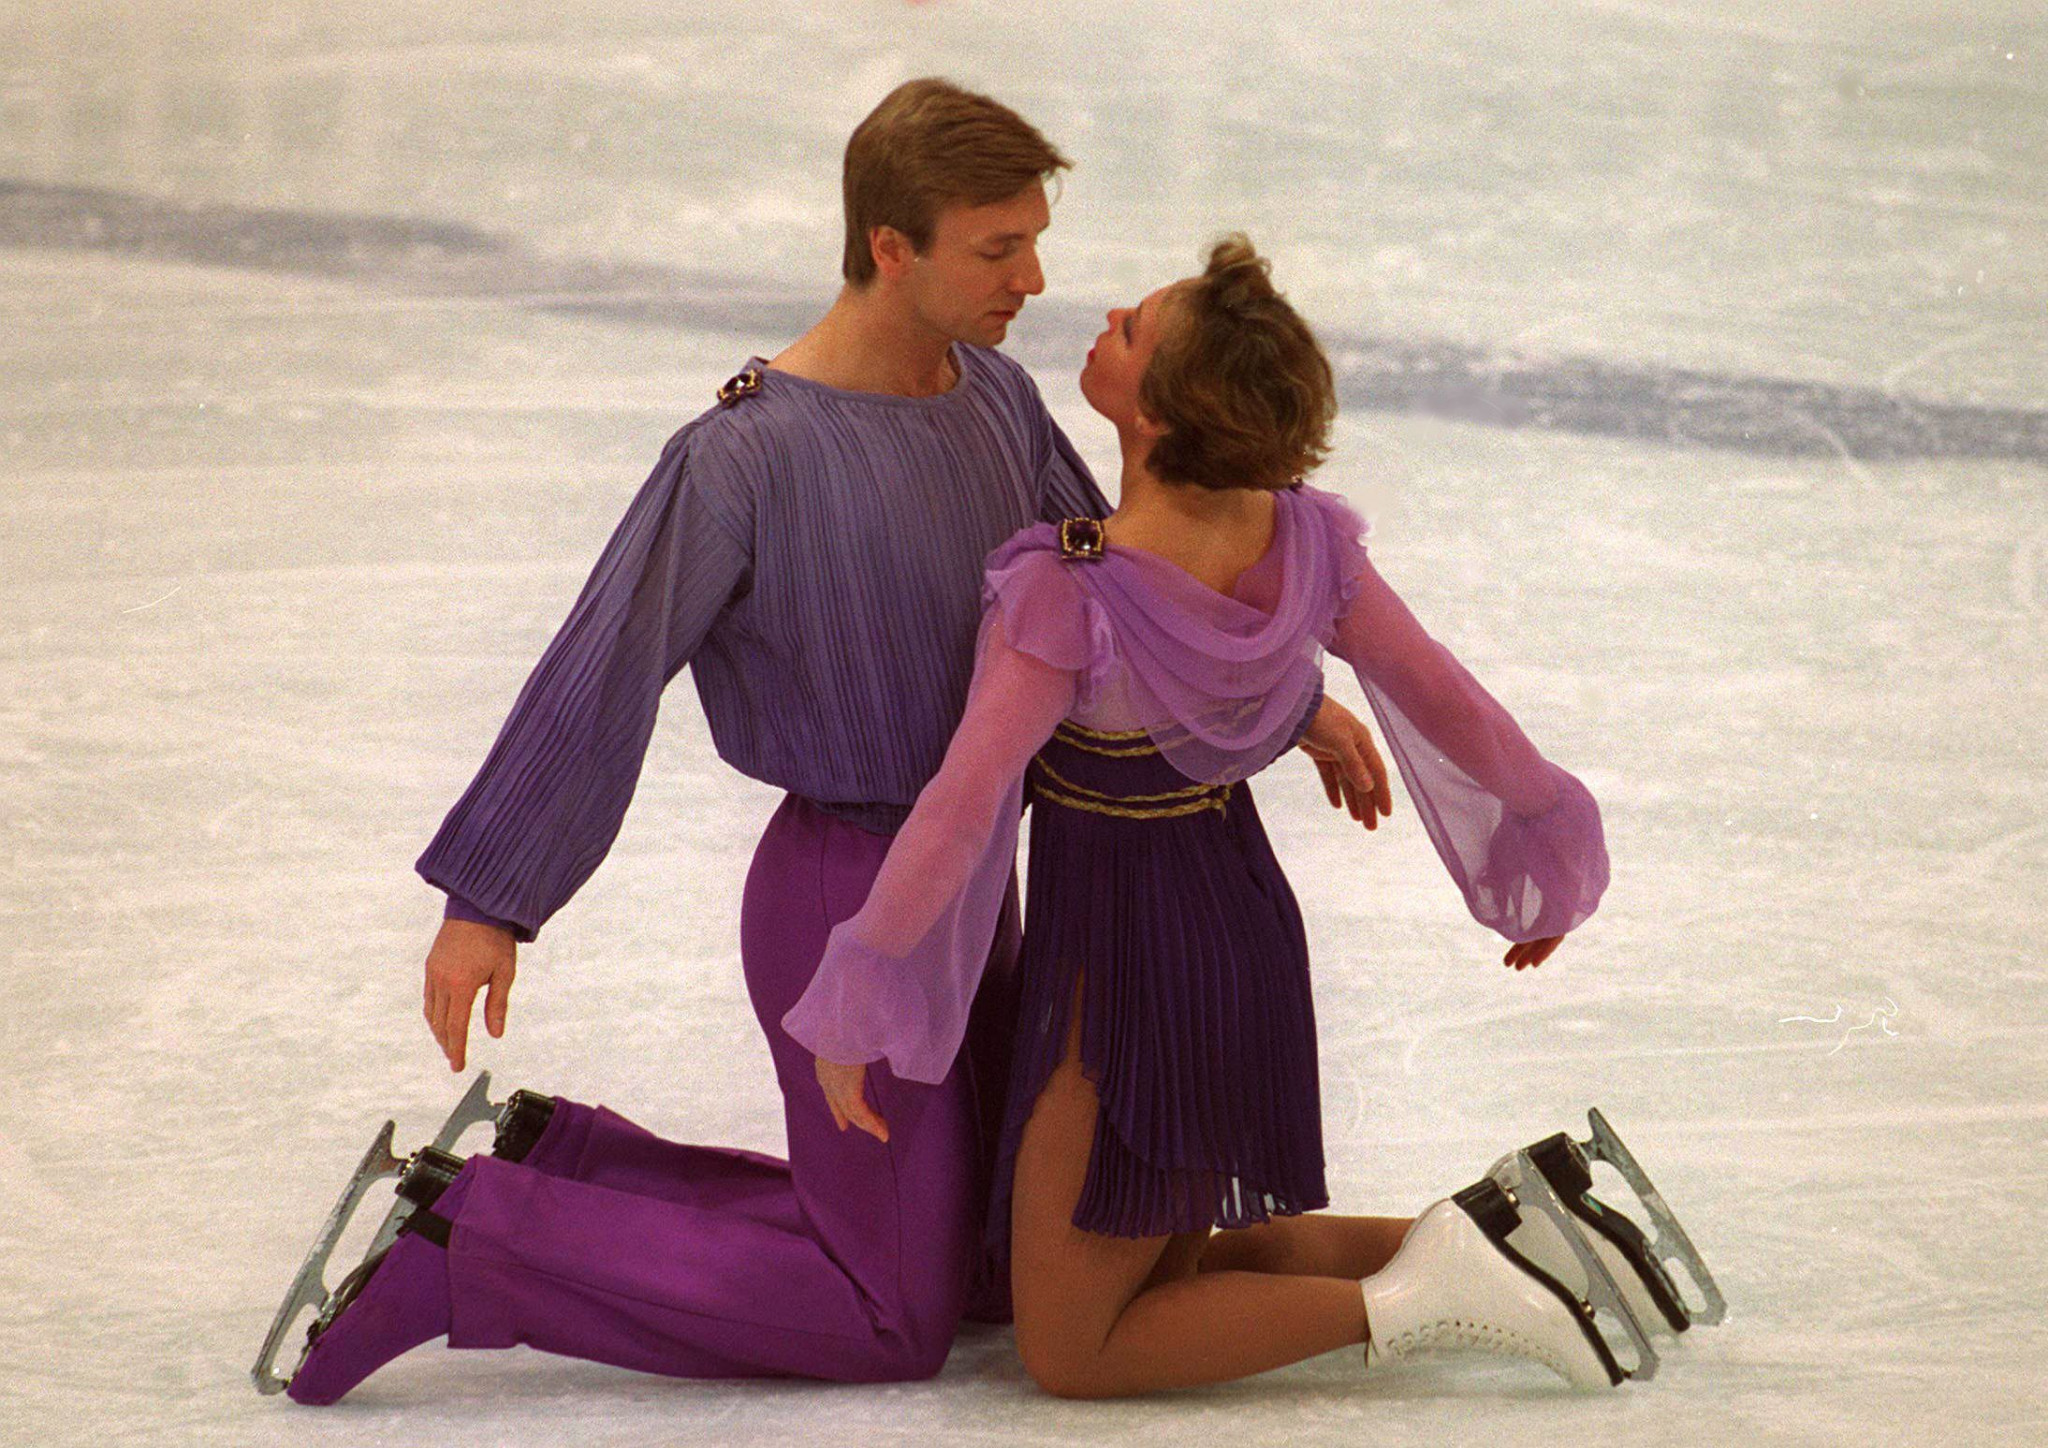 Torvill and Dean's Bolero won Olympic gold on Valentine's Day in 1984 ©Getty Images